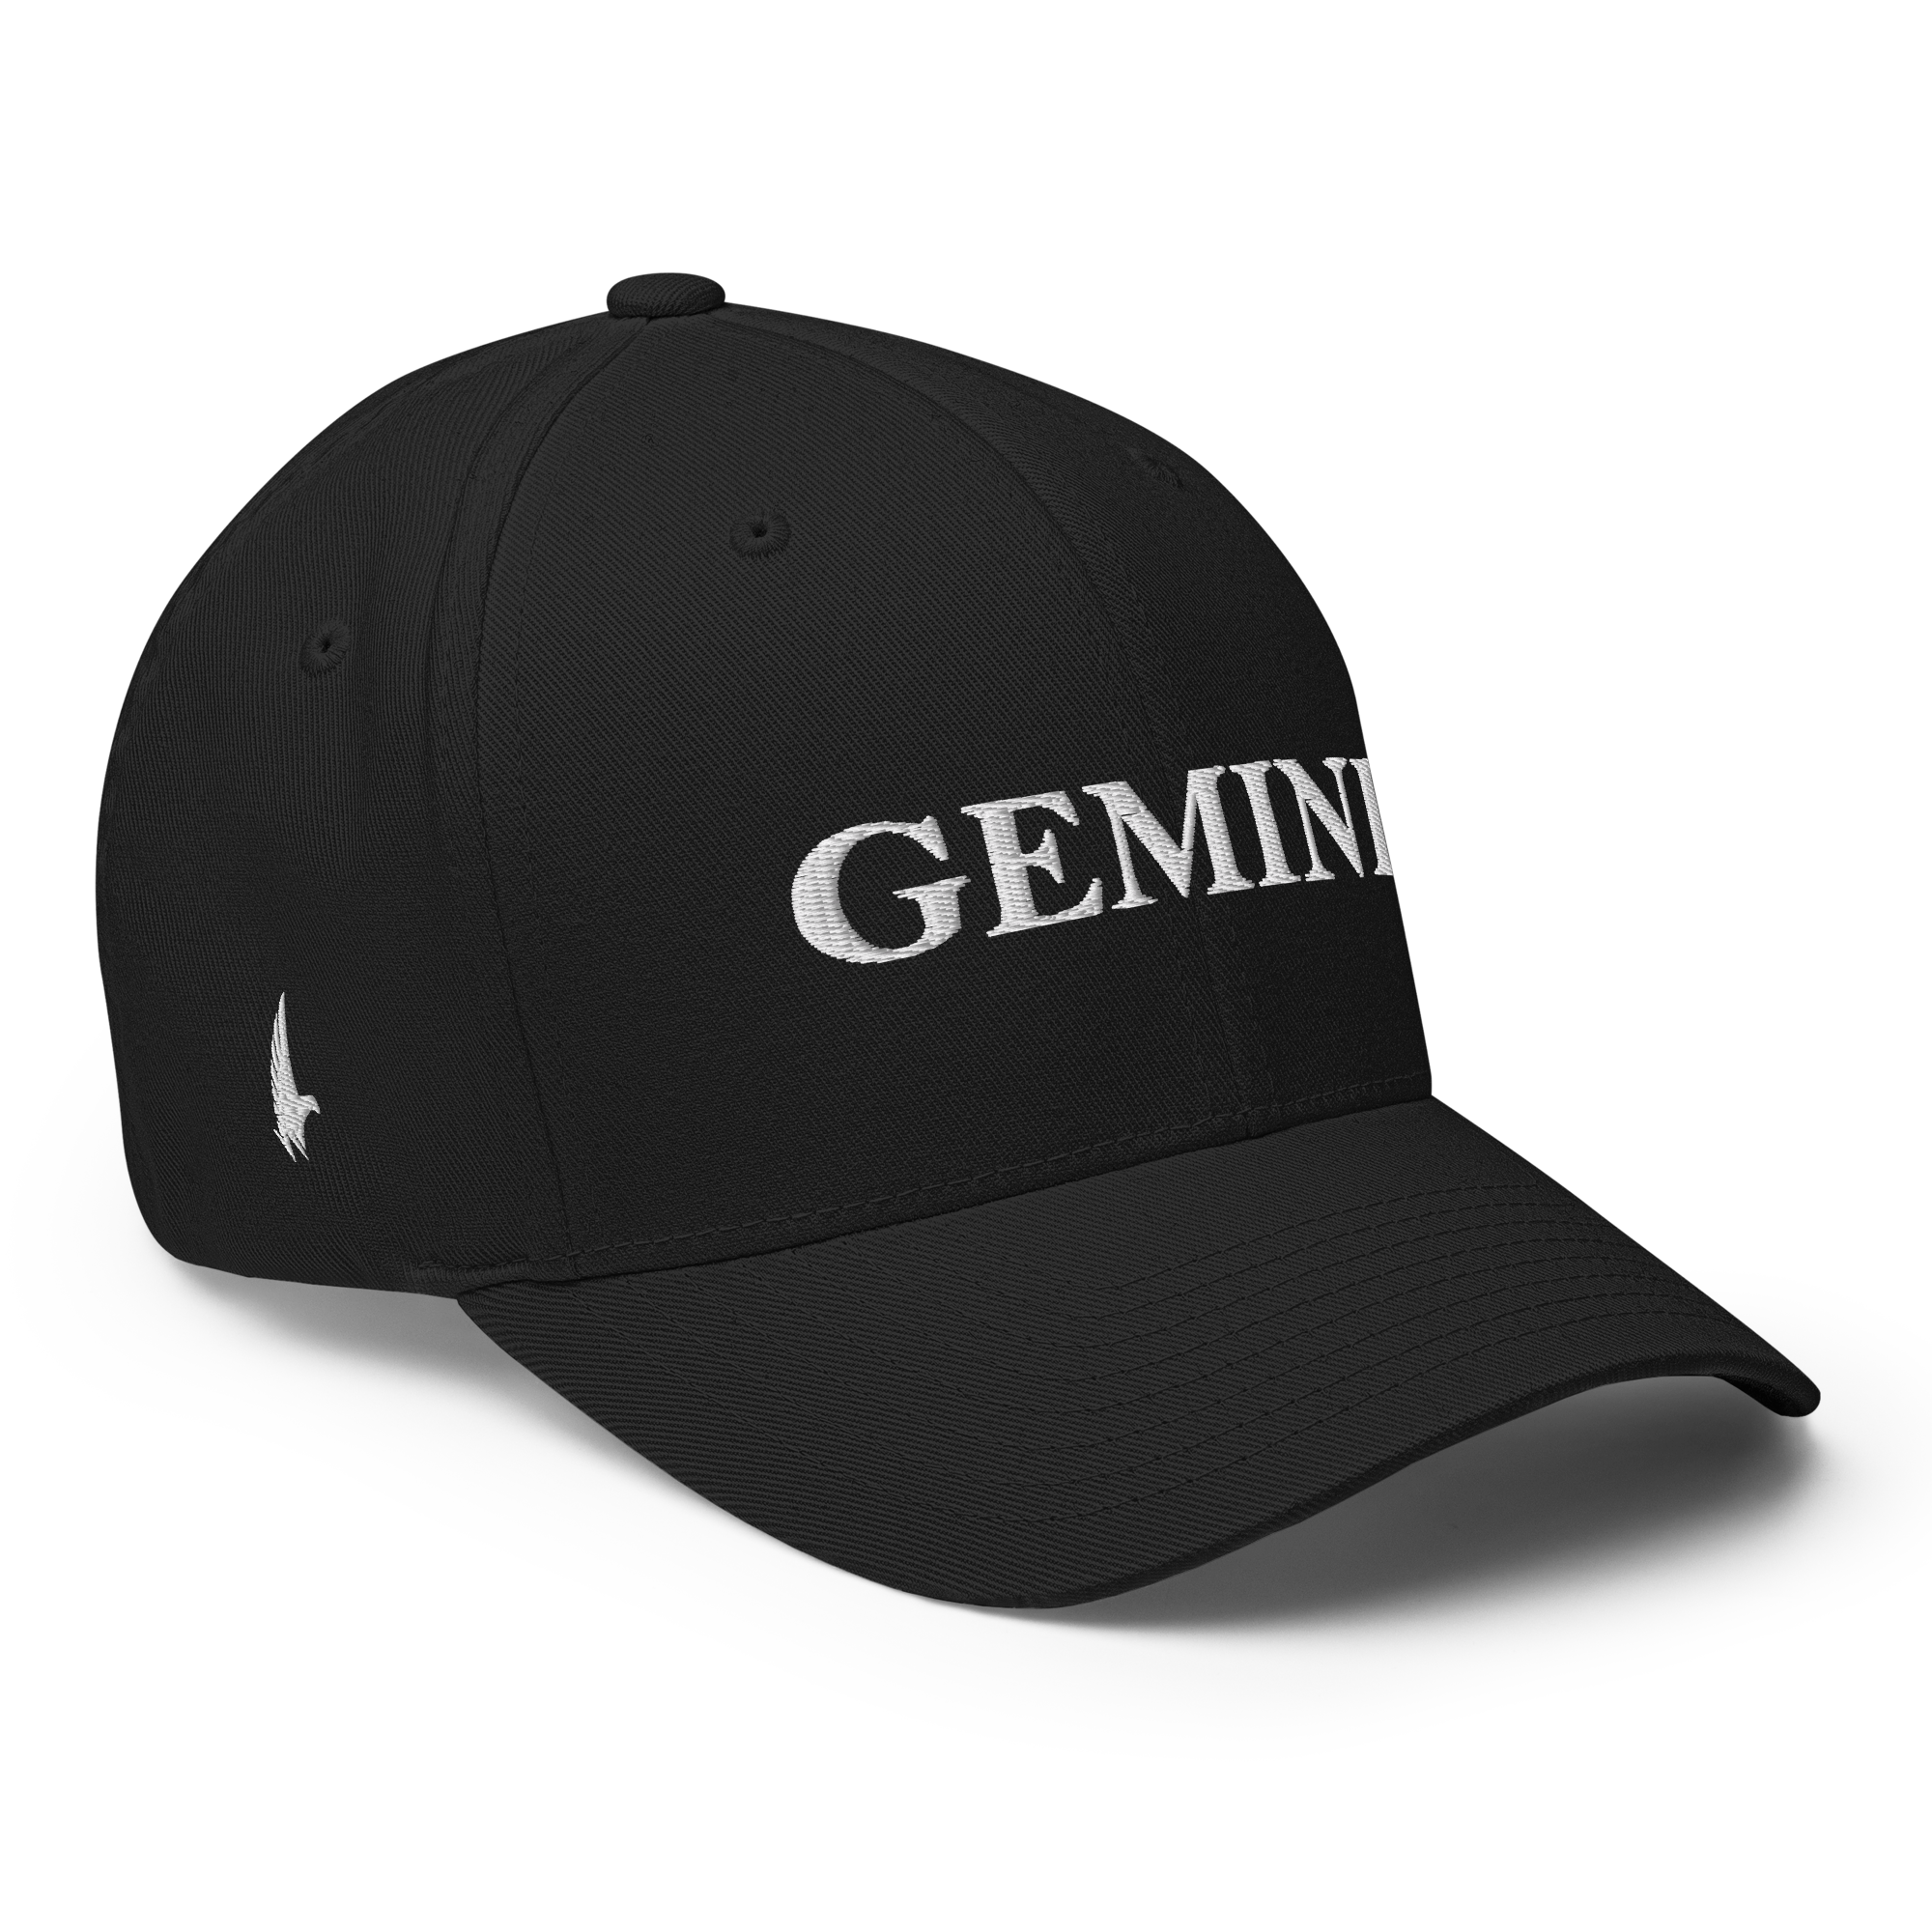 Original Gemini Fitted Hat Black Fitted - Loyalty Vibes